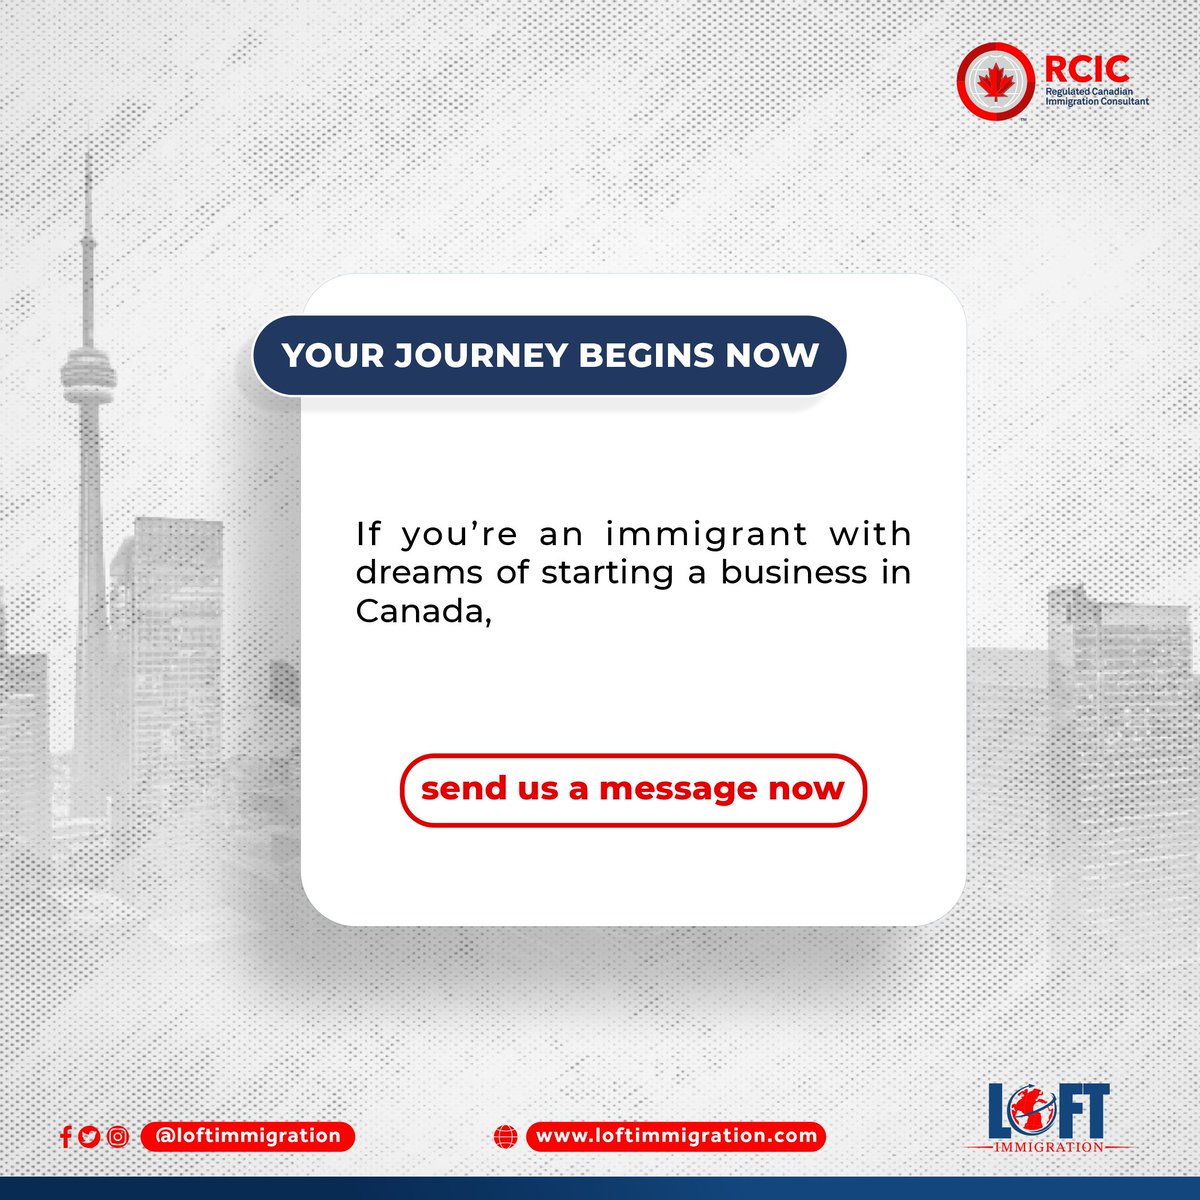 Do you dream of coming to Canada through Business Immigration? Here are the best businesses for Immigrants in Canada. Ready to call Canada home? Send us a direct message (DM) now.
.
.
.
#canadabusinessimmigration #loftimmigration